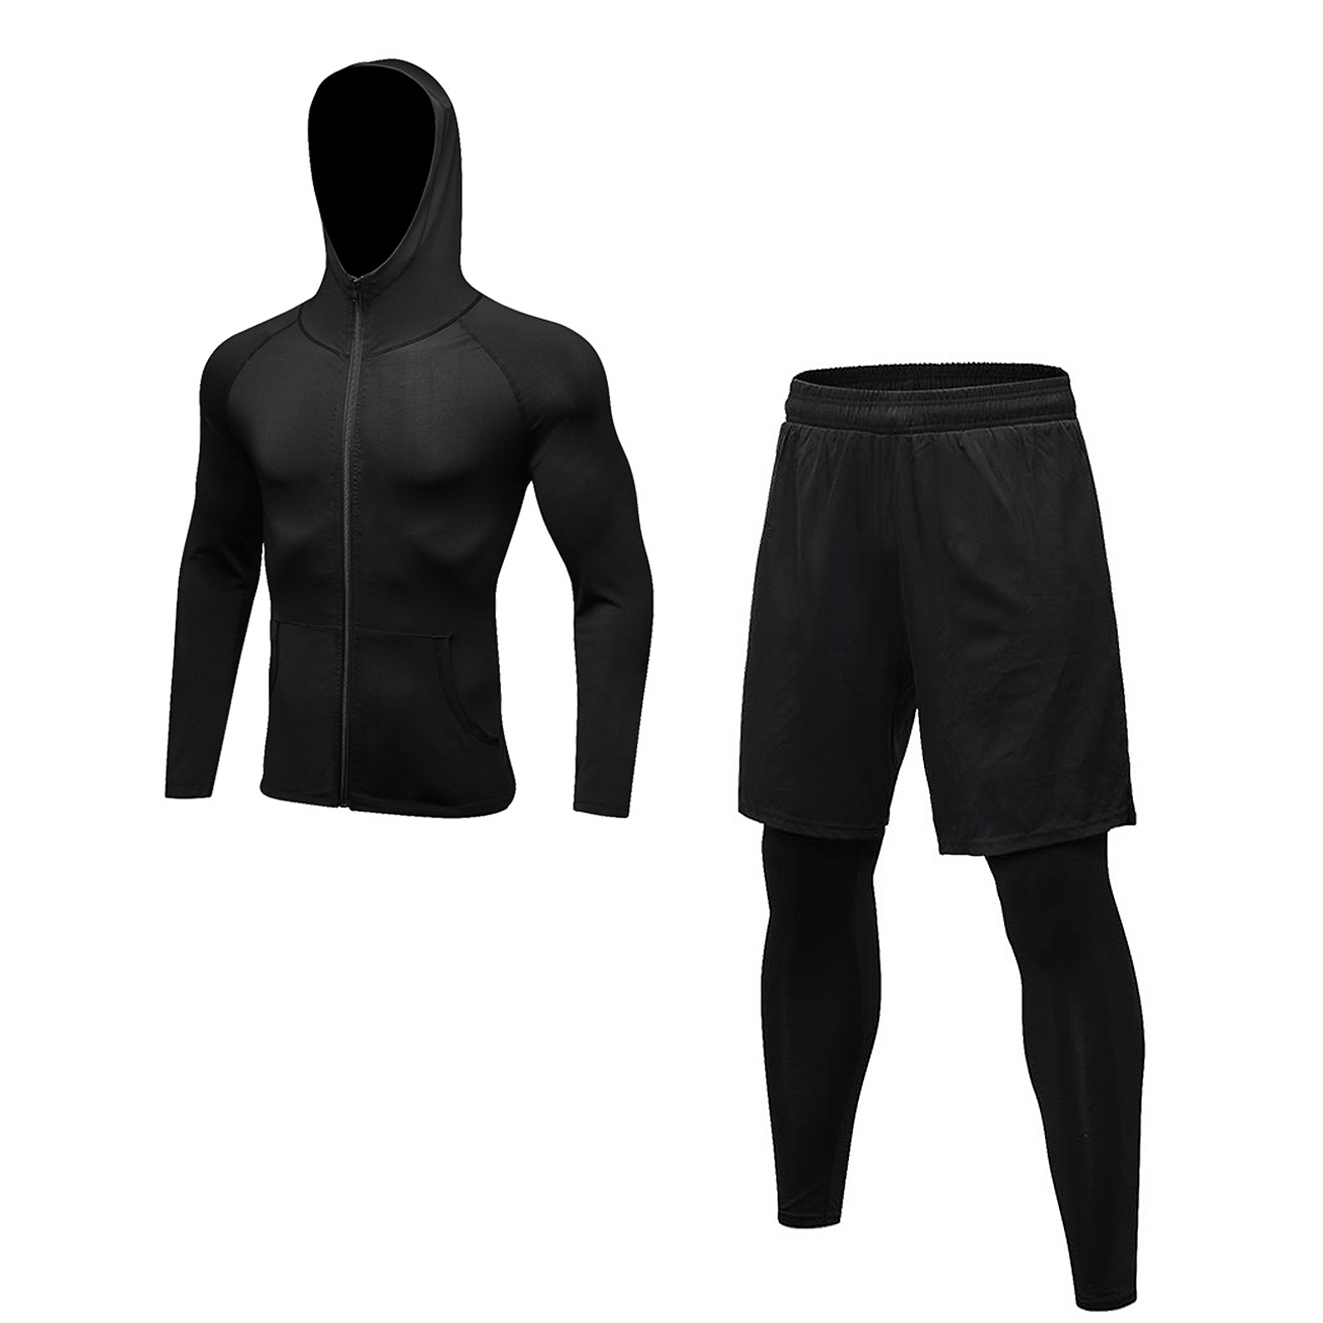 Buy Men's Training Tight-fit fitness suit coat + trousers on ezbuy SG